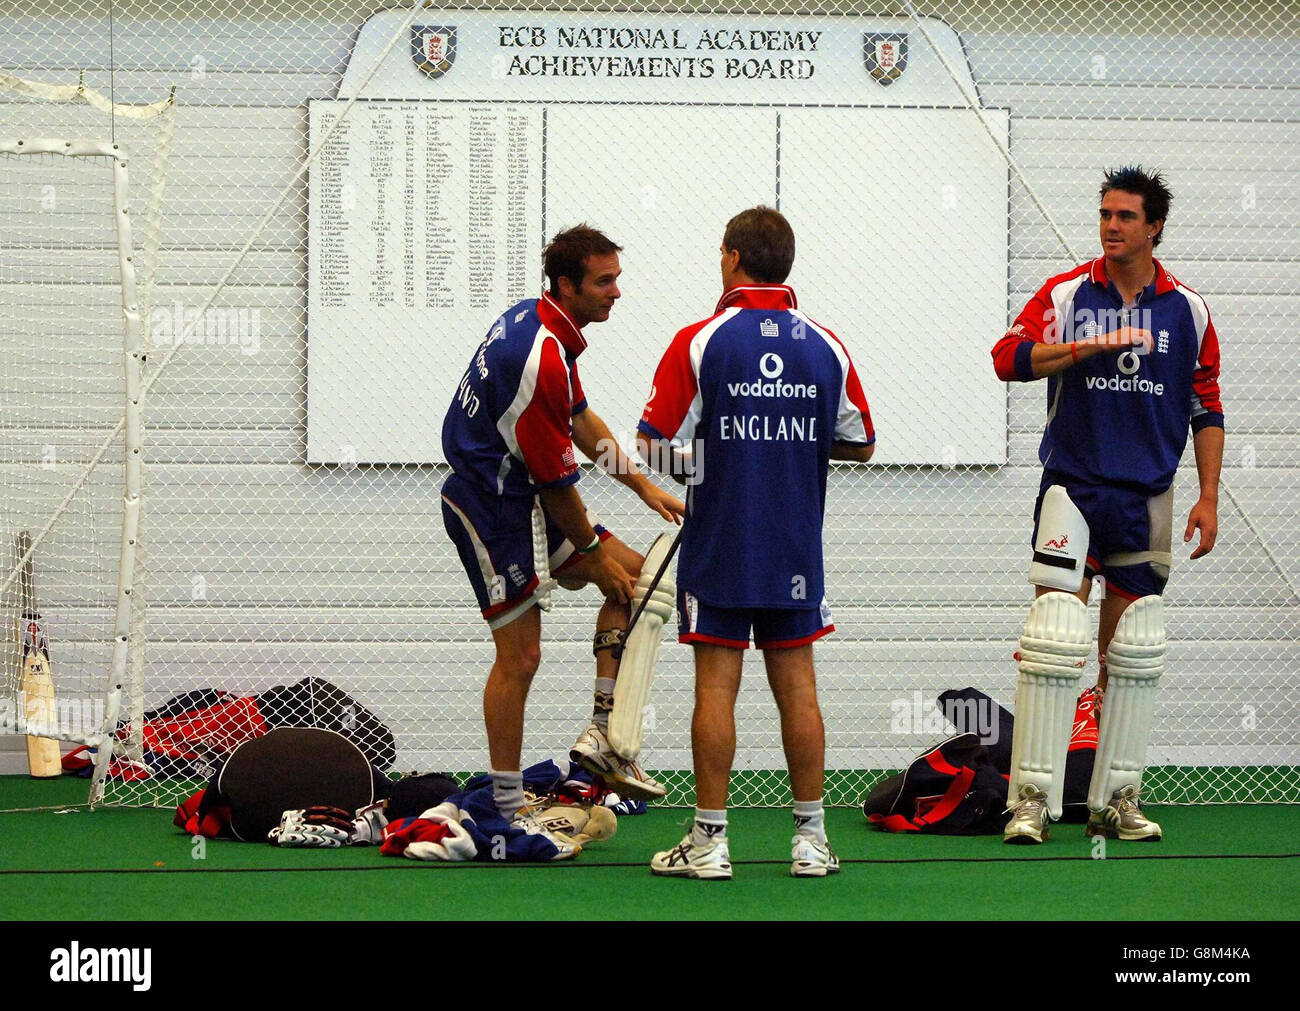 England's Kevin Pietersen (R) and Michael Vaughan (L) talk to assistant coach Tim Boon during practice at the indoor National Cricket Academy in Loughborough, Wednesday August 24, 2005, ahead of the fourth npower Test match against Australia. The series is level at 1-1. PRESS ASSOCIATION Photo. Photo credit should read: Rui Vieira/PA. Stock Photo